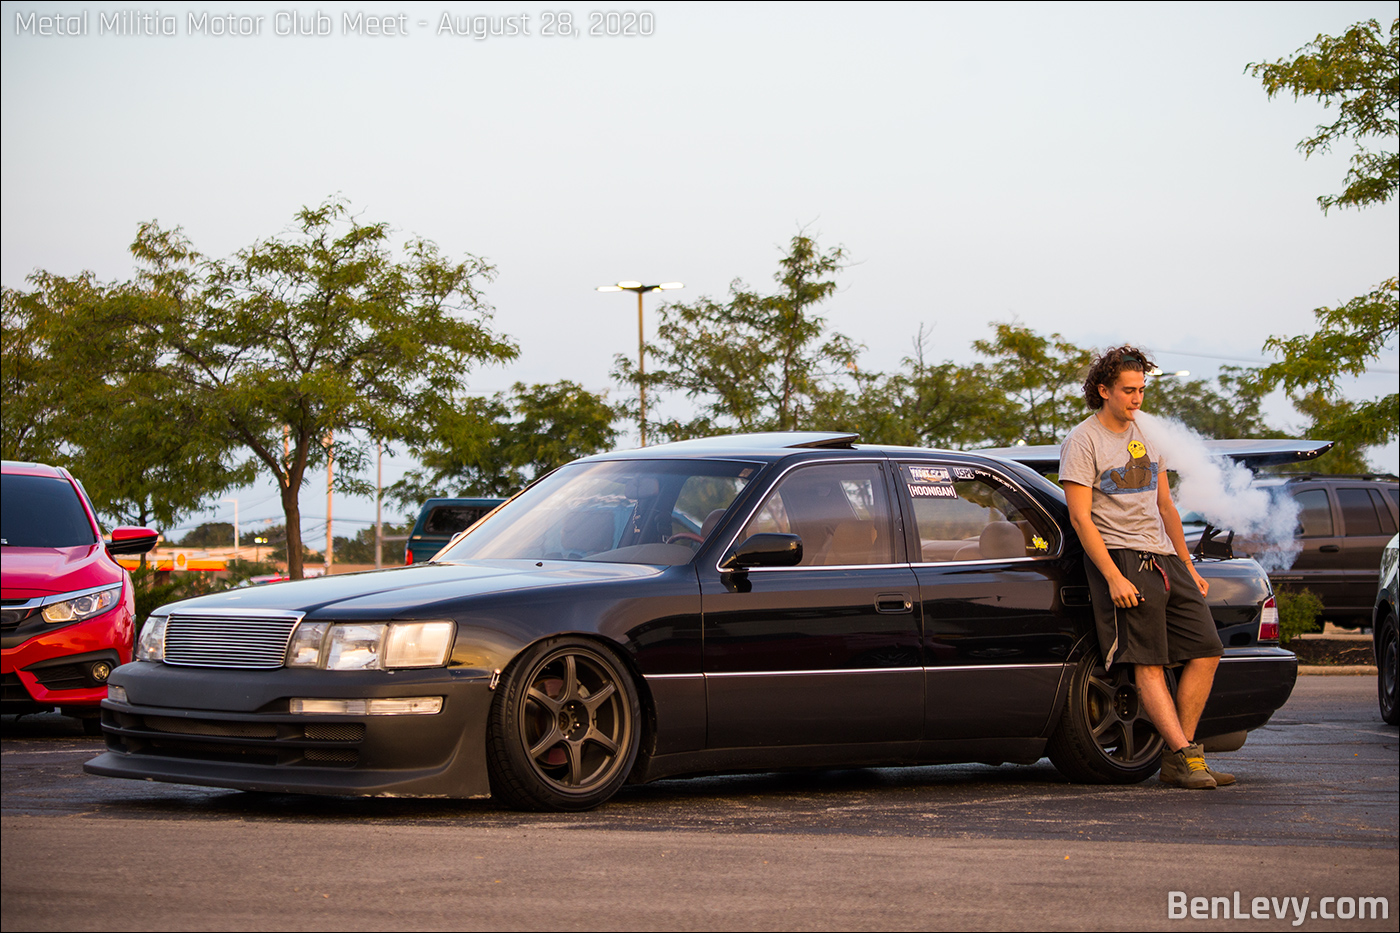 A.L. chilling with his Lexus LS430